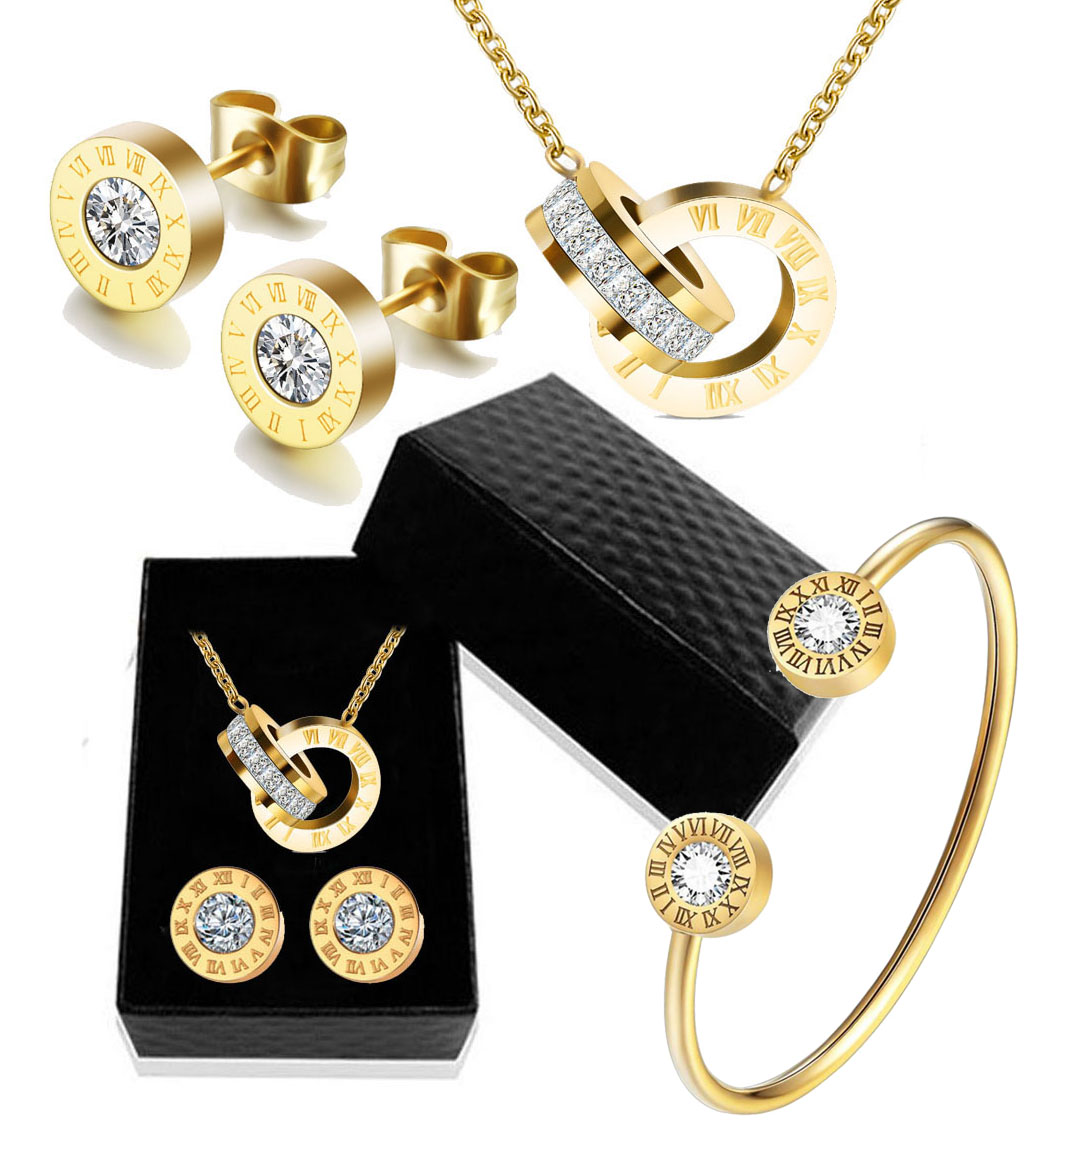 Chic Stainless Steel Golden Pendant Necklace Earrings Jewelry Set Wedding Gift